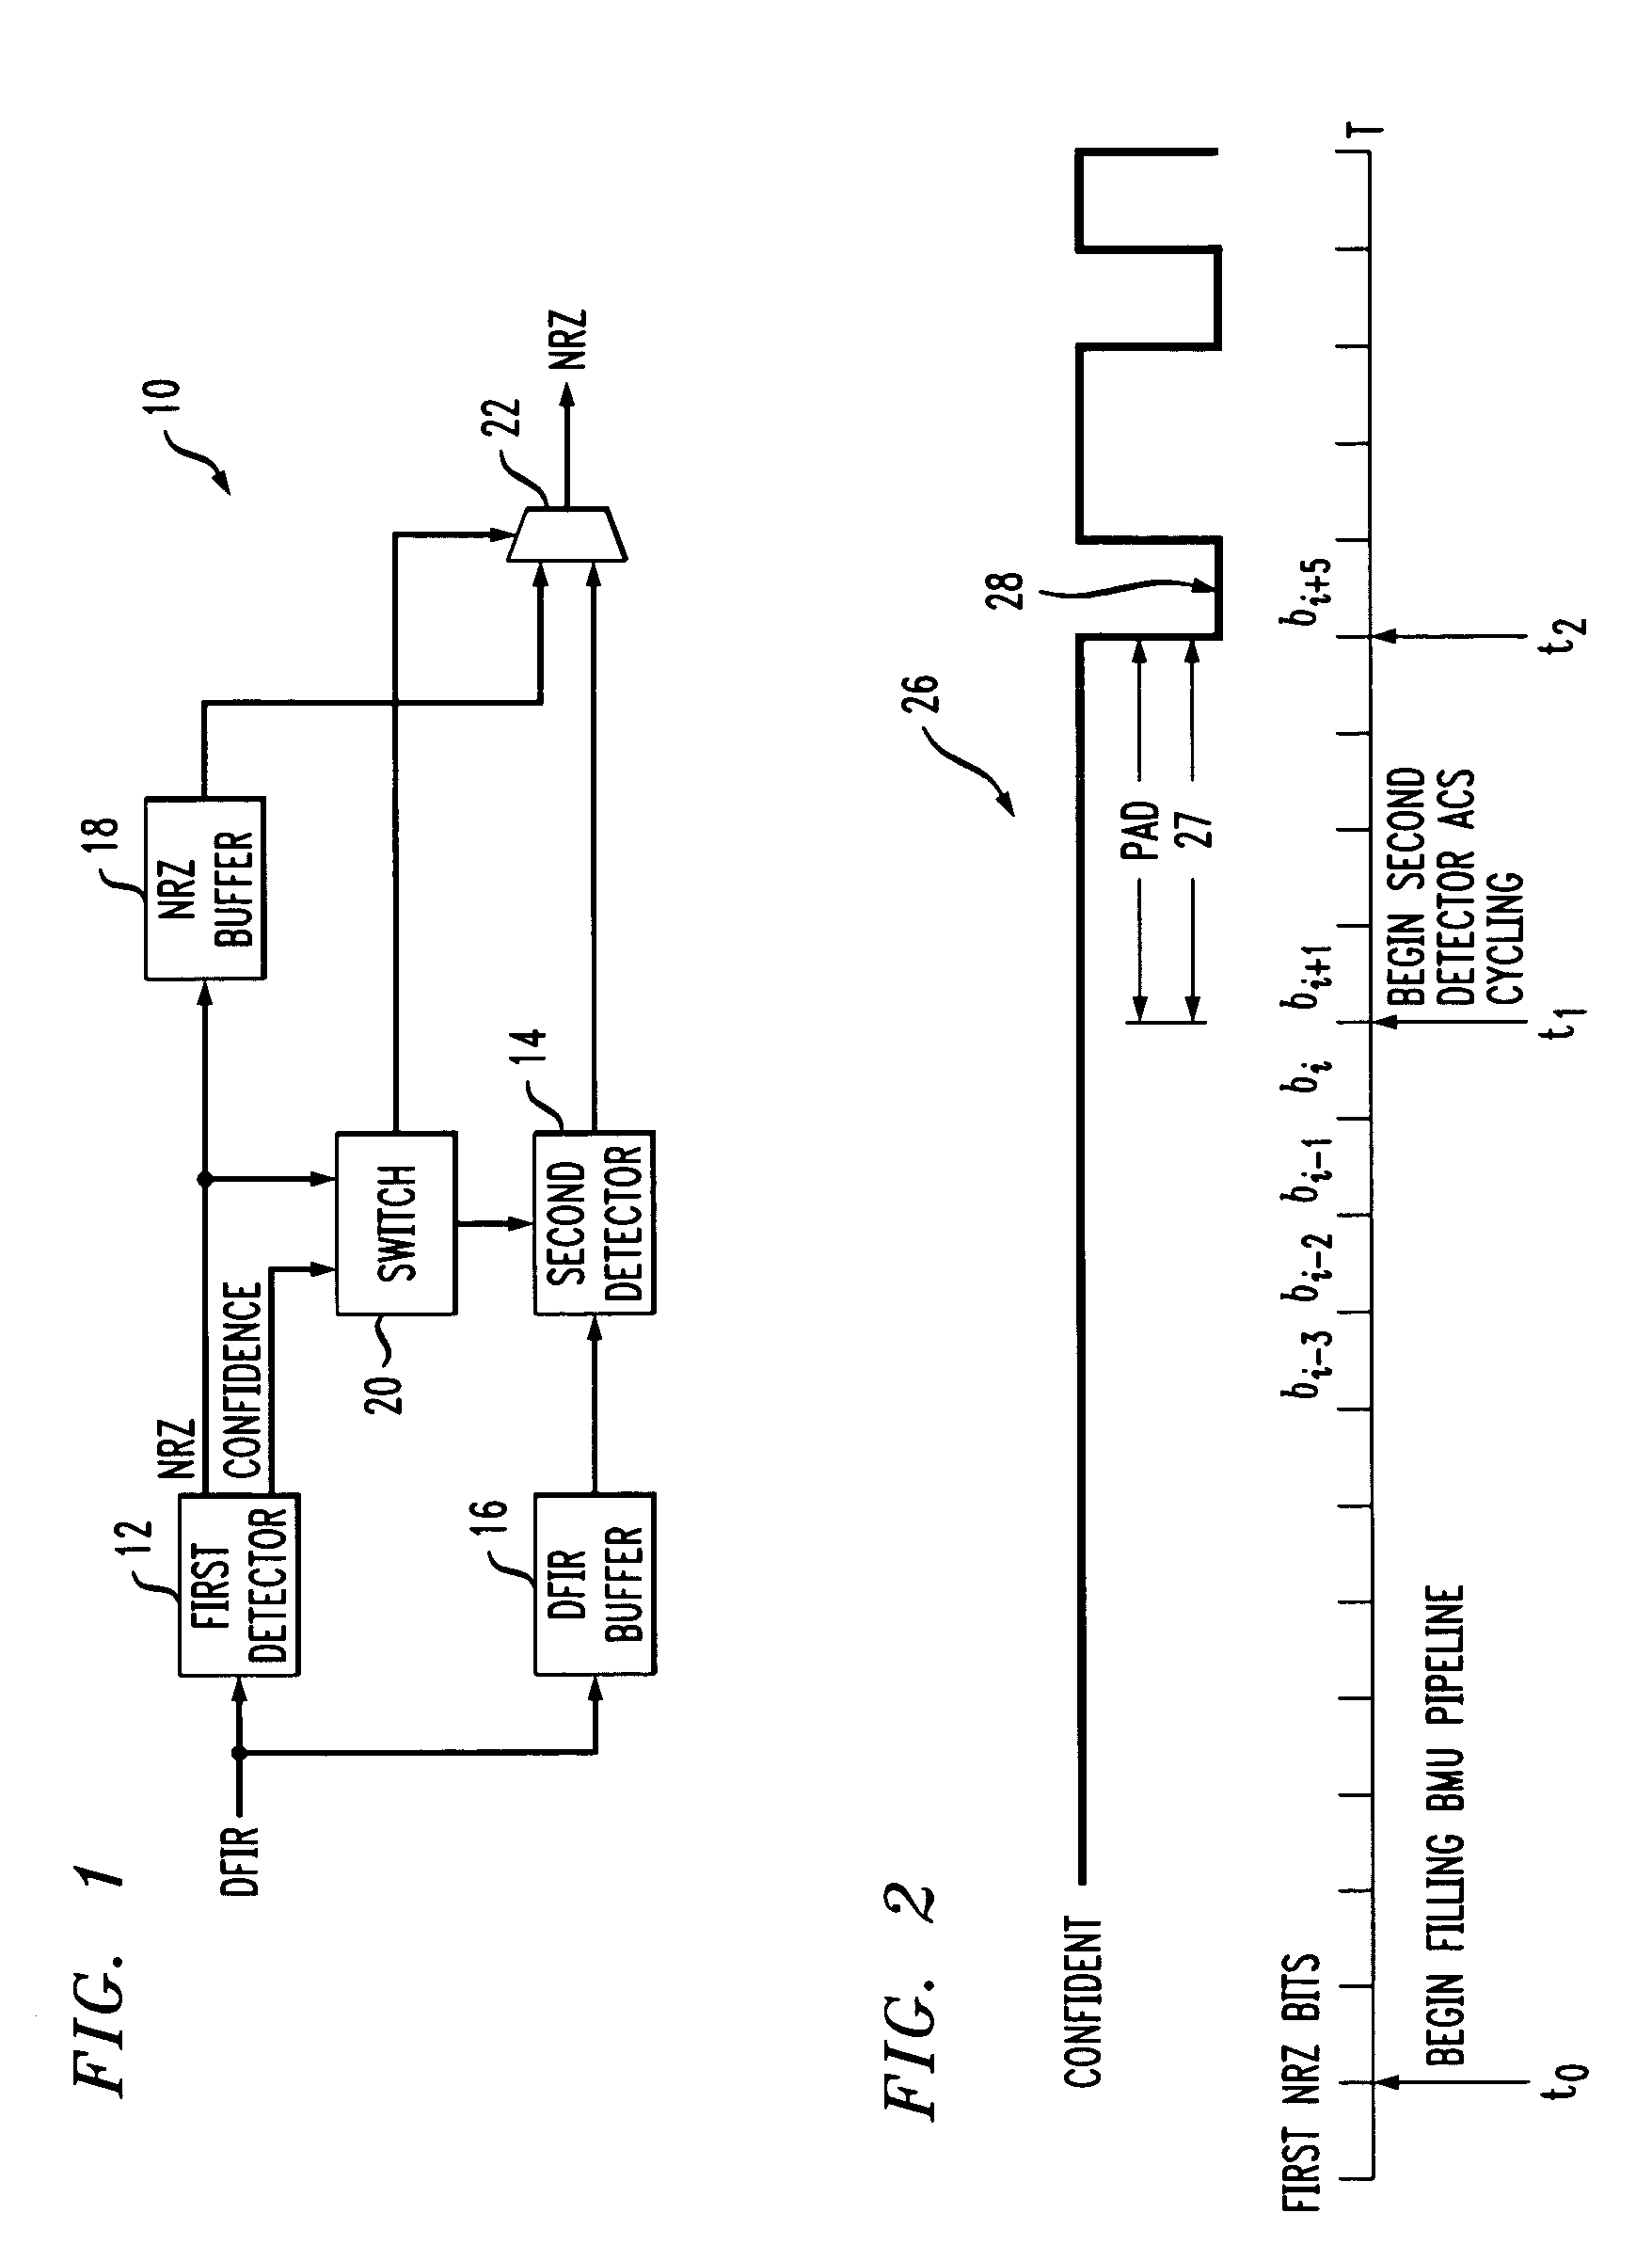 Composite data detector and a method for detecting data